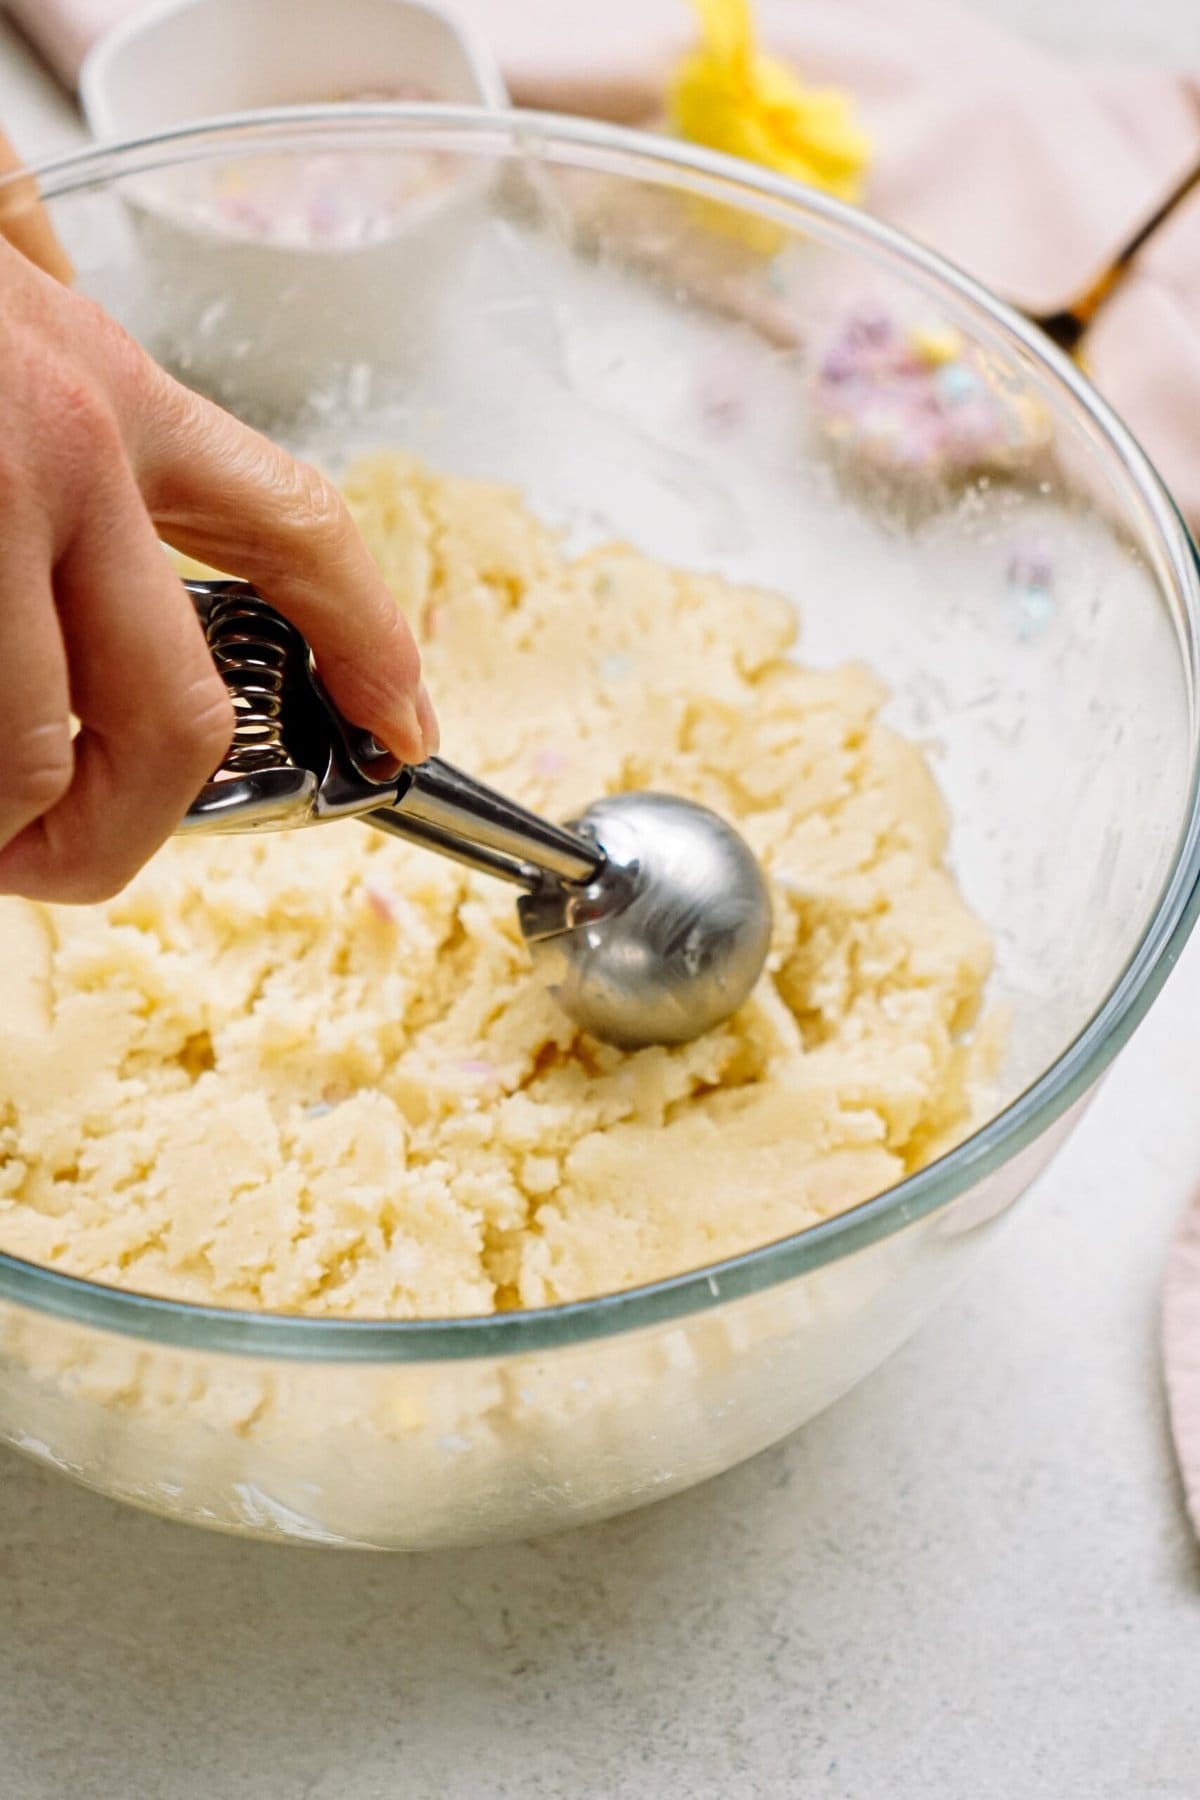 Scooping cake from a glass bowl with a cookie scoop.